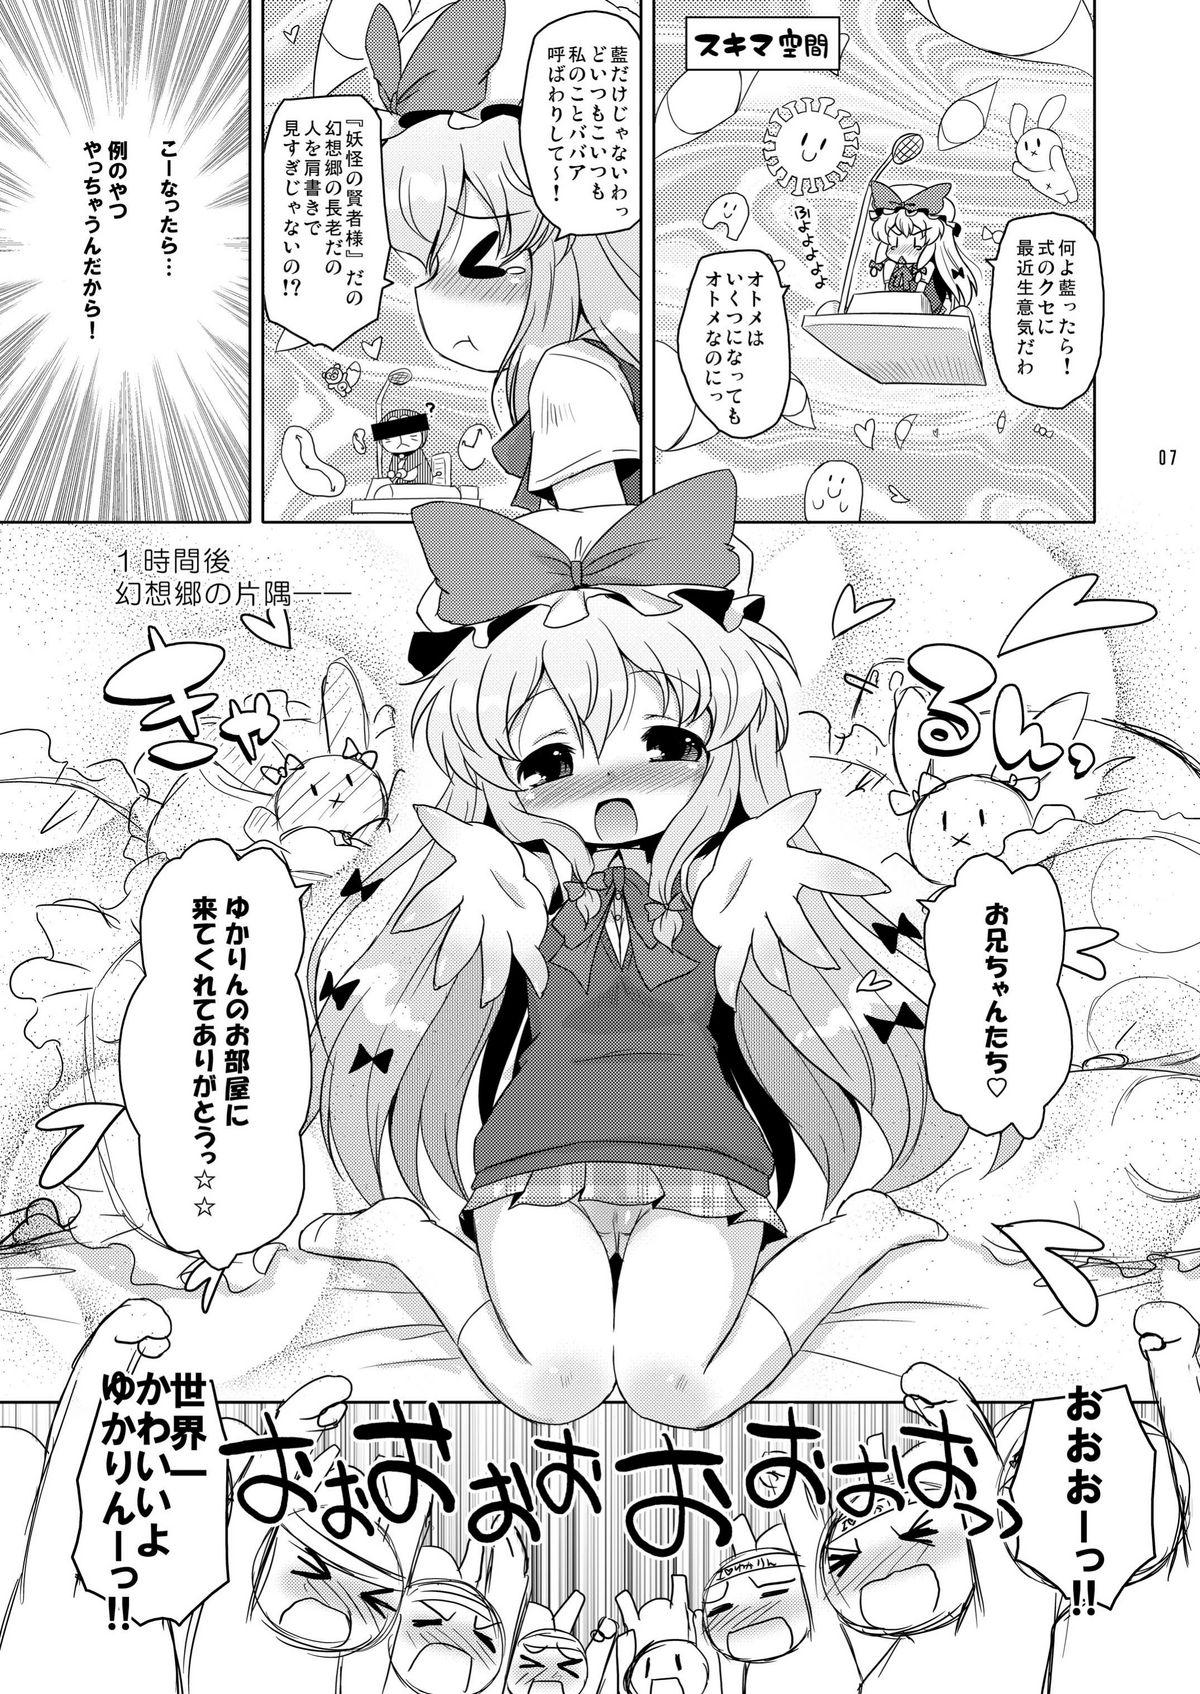 Forbidden Love Me! Fancy Baby Doll - Touhou project Tats - Page 7